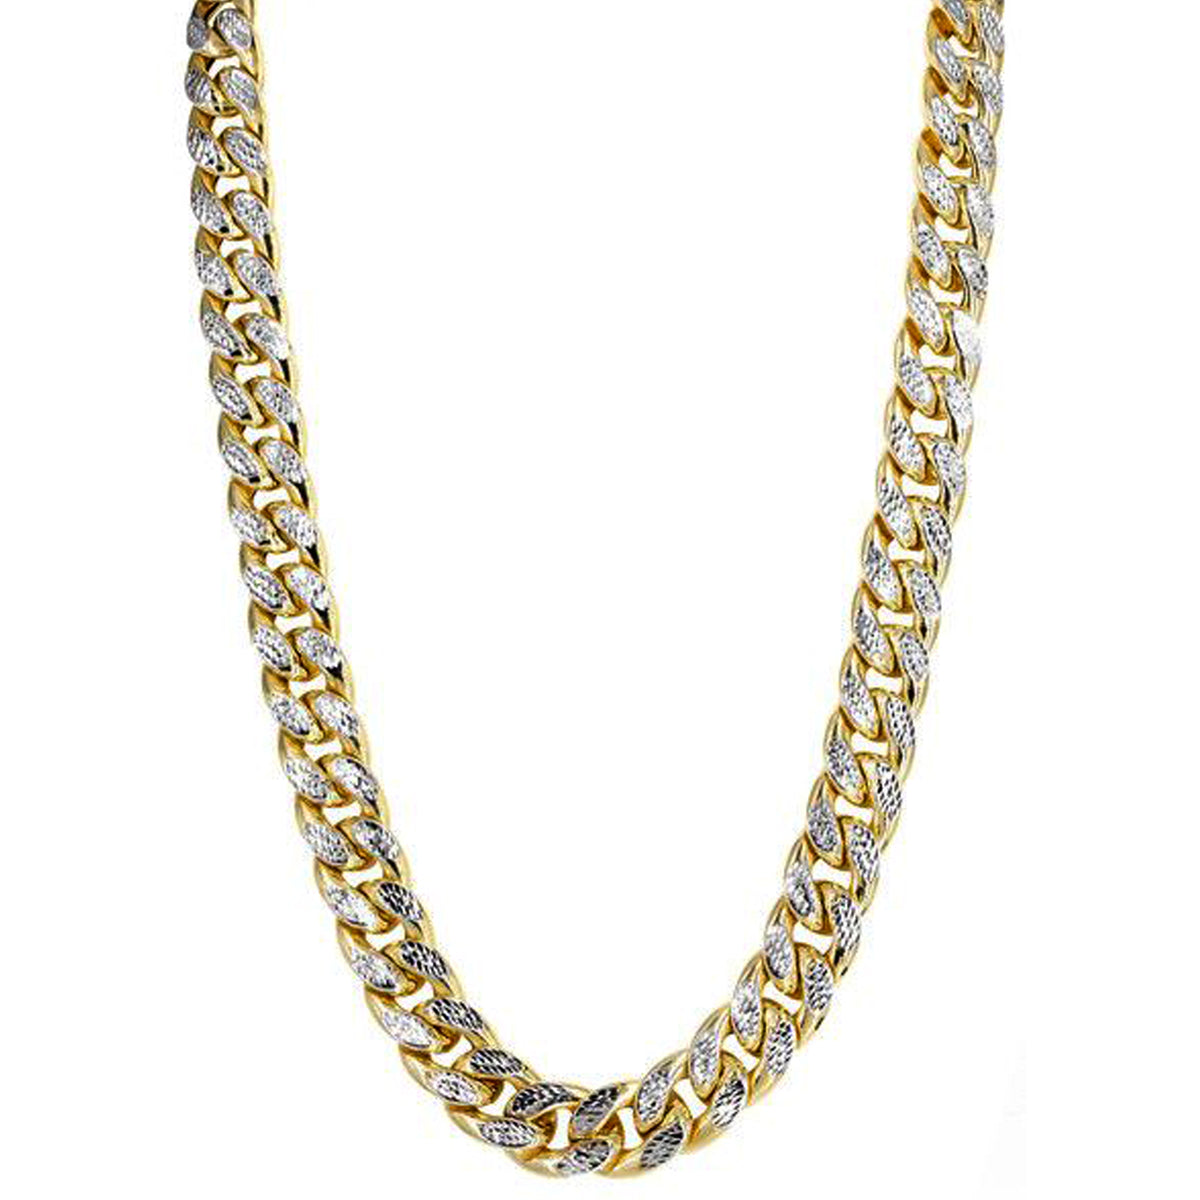 14k Yellow And White Gold Miami Cuban Pave Link Chain Necklace, Width 13.5mm, 24" fine designer jewelry for men and women